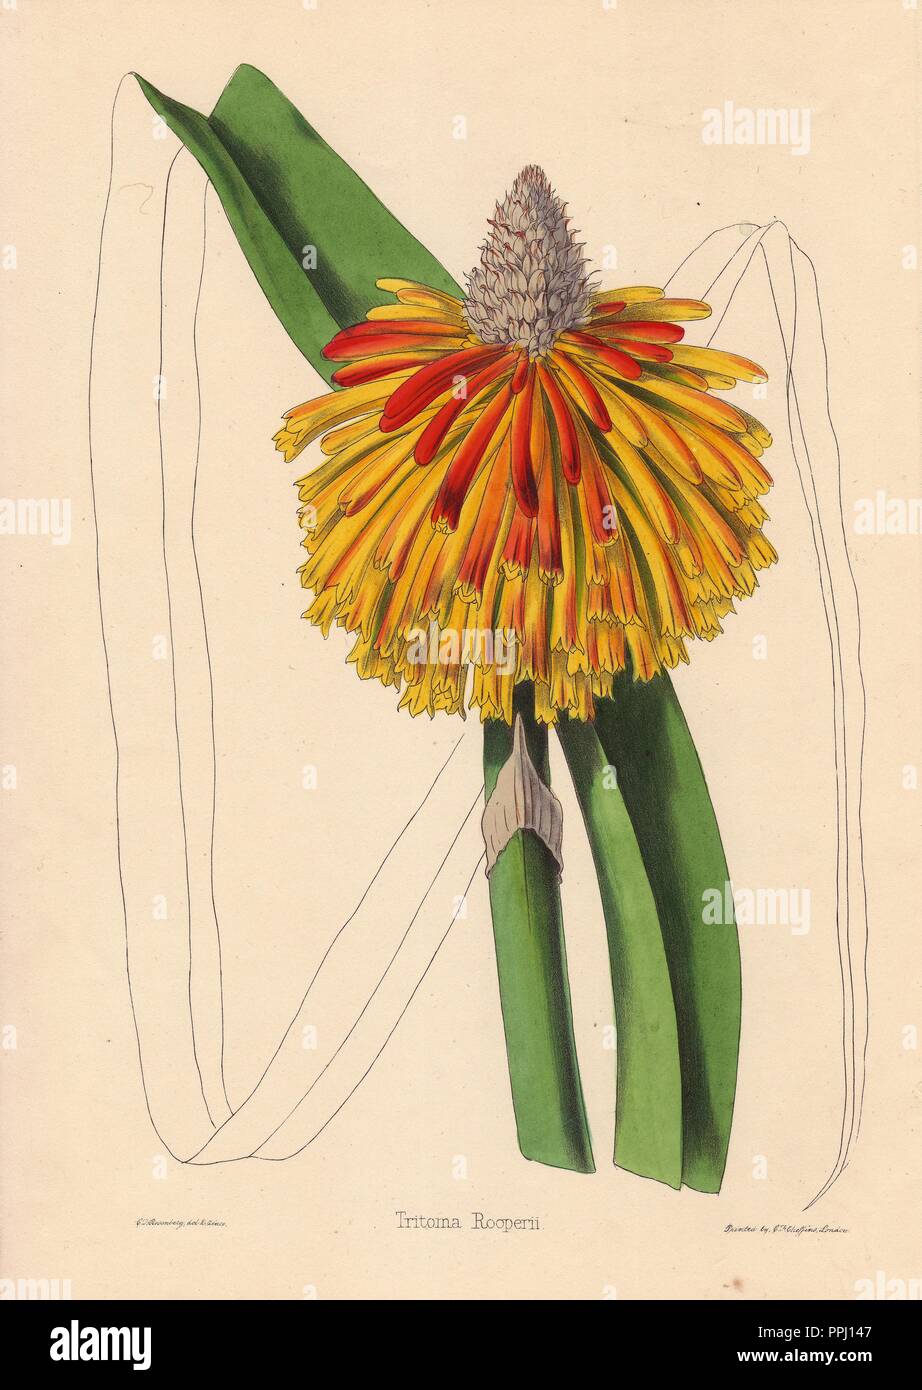 Tritoma rooperii. . Yellow and orange tropical plant Kniphofia rooperi. Drawn and zincographed by C. T. Rosenberg, for Thomas Moore's 'The Garden Companion and Florists' Guide,' 1852, published by Charles Frederick Cheffins.. . C.T. Rosenberg drew and engraved many botanicals for Moore's 'The Gardener's Magazine of Botany' and W.J. Hooker's 'Curtis's Botanical Magazine' in the middle of the 19th century. Moore (1821-1887) was the curator of the Botanic Garden, Chelsea, from 1847 until his death. Stock Photo